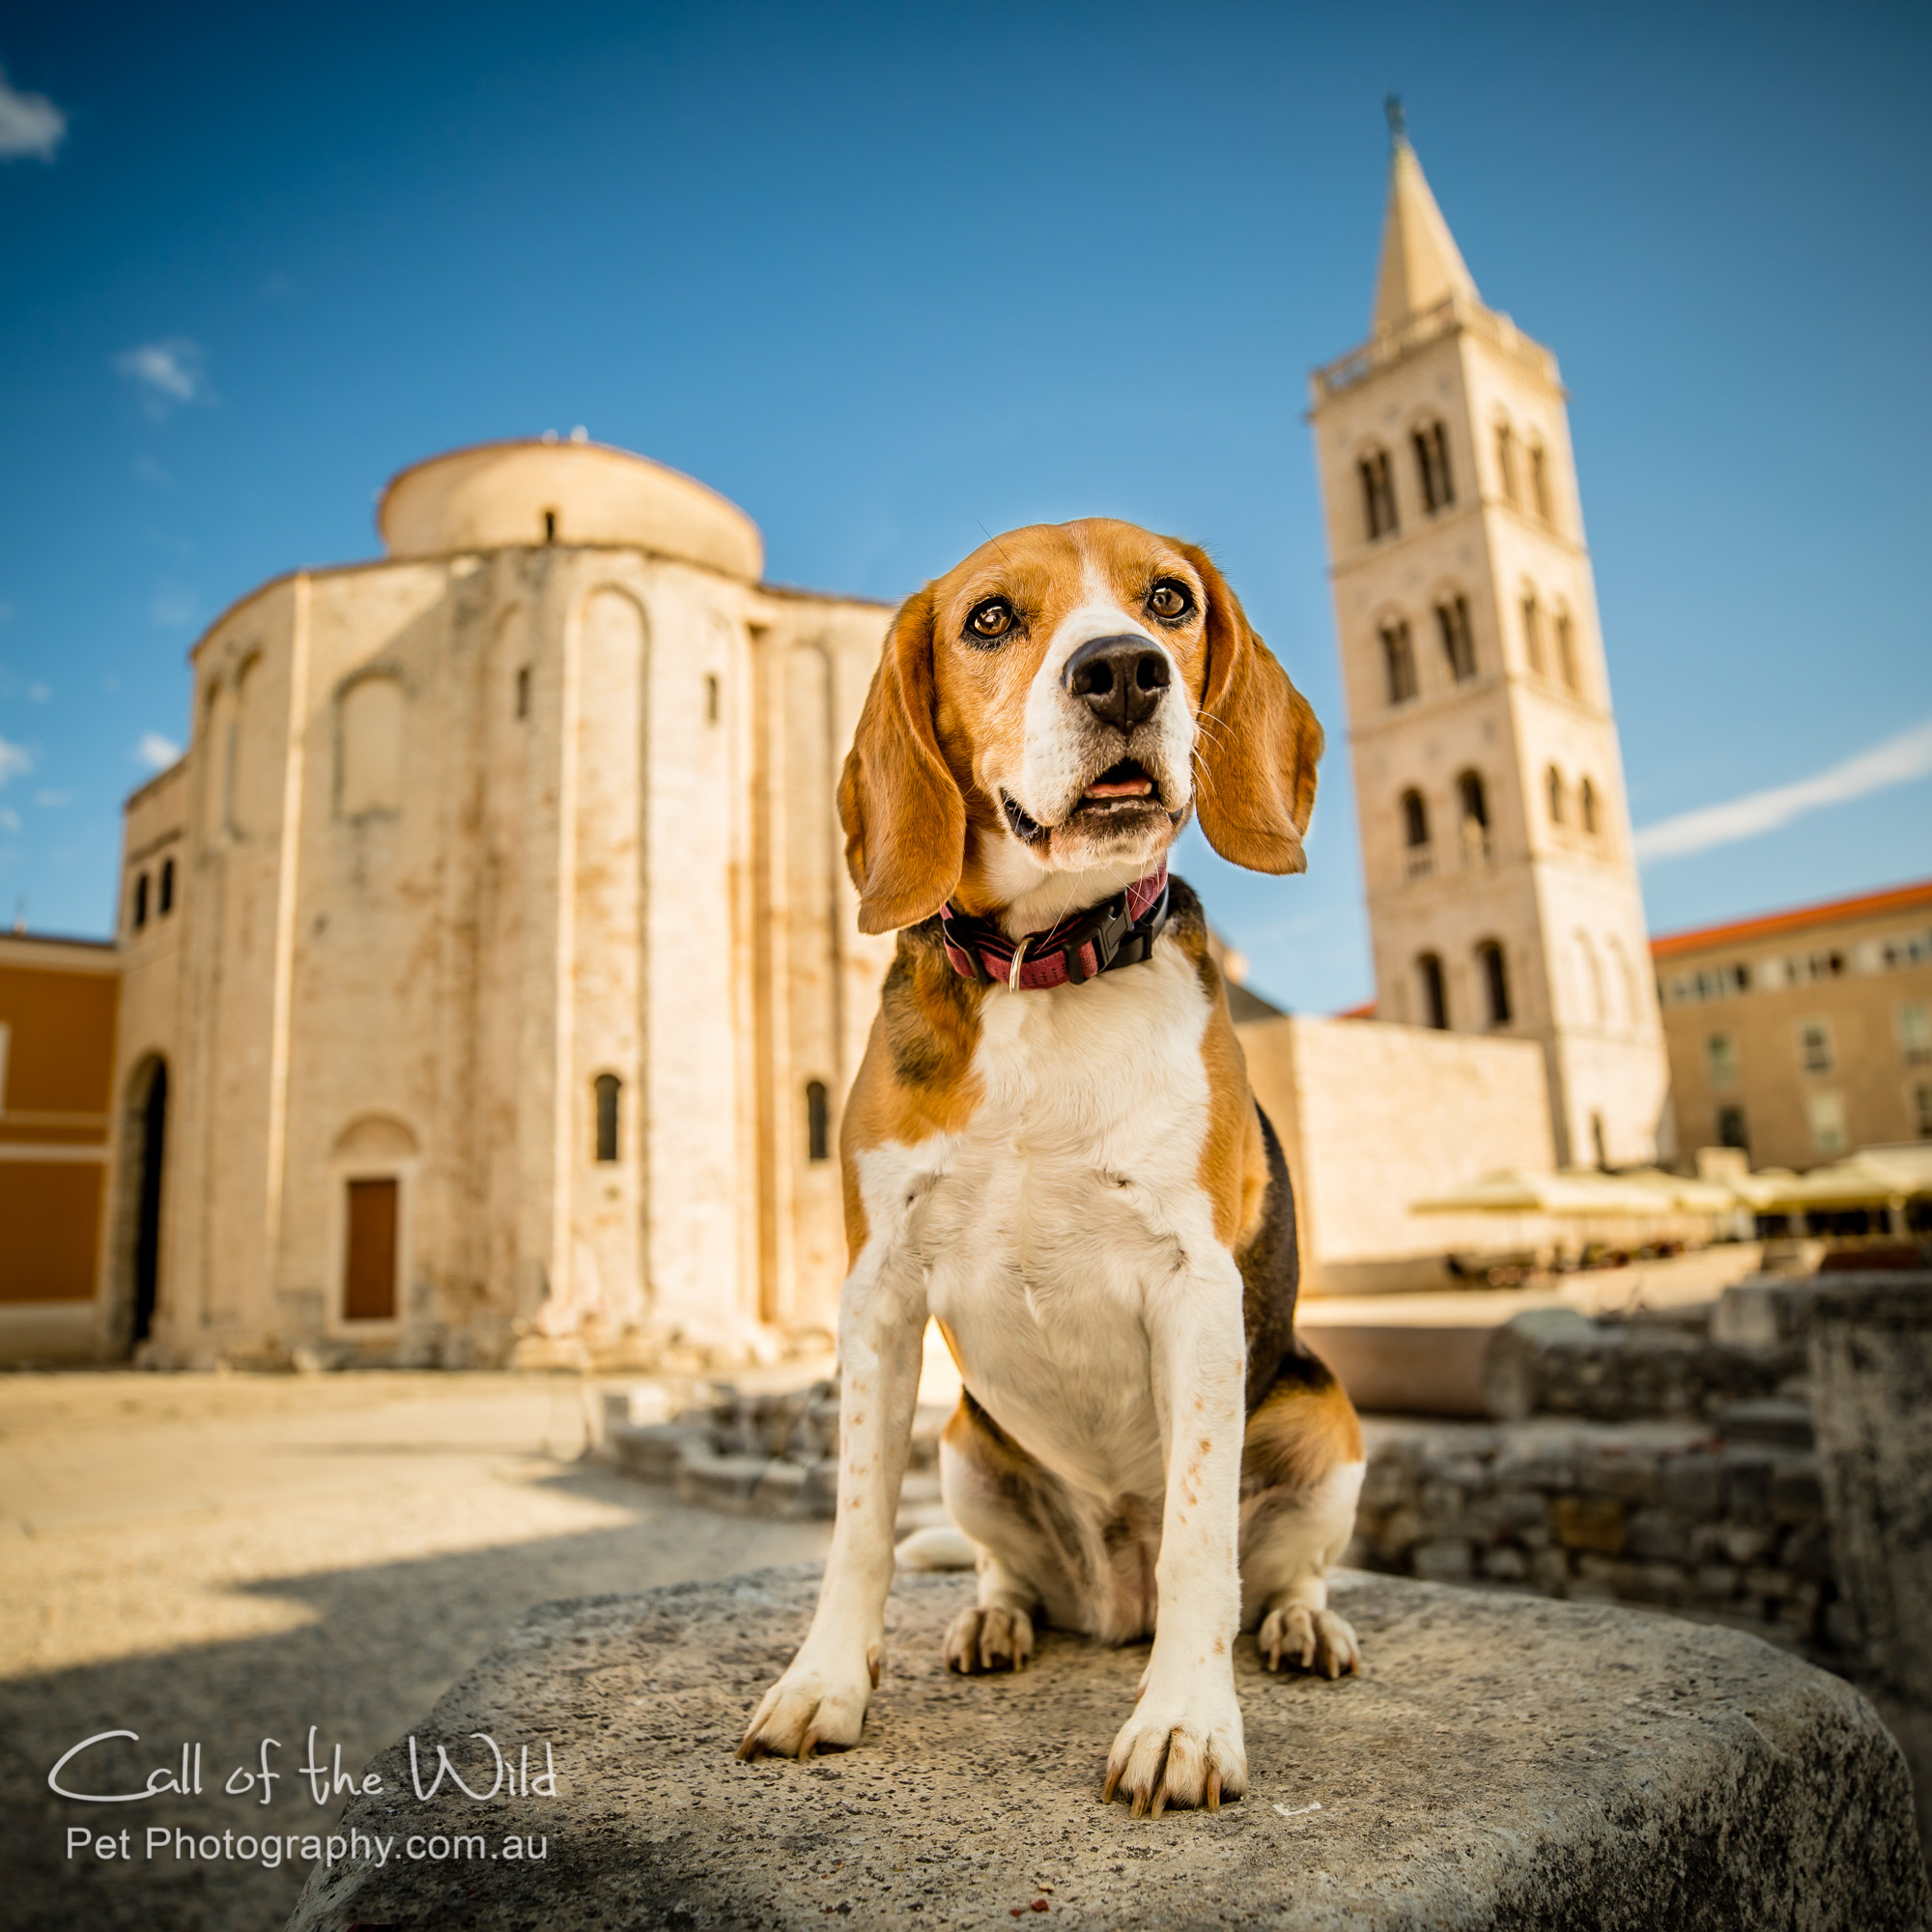 Lilly the Beagle from Croatia